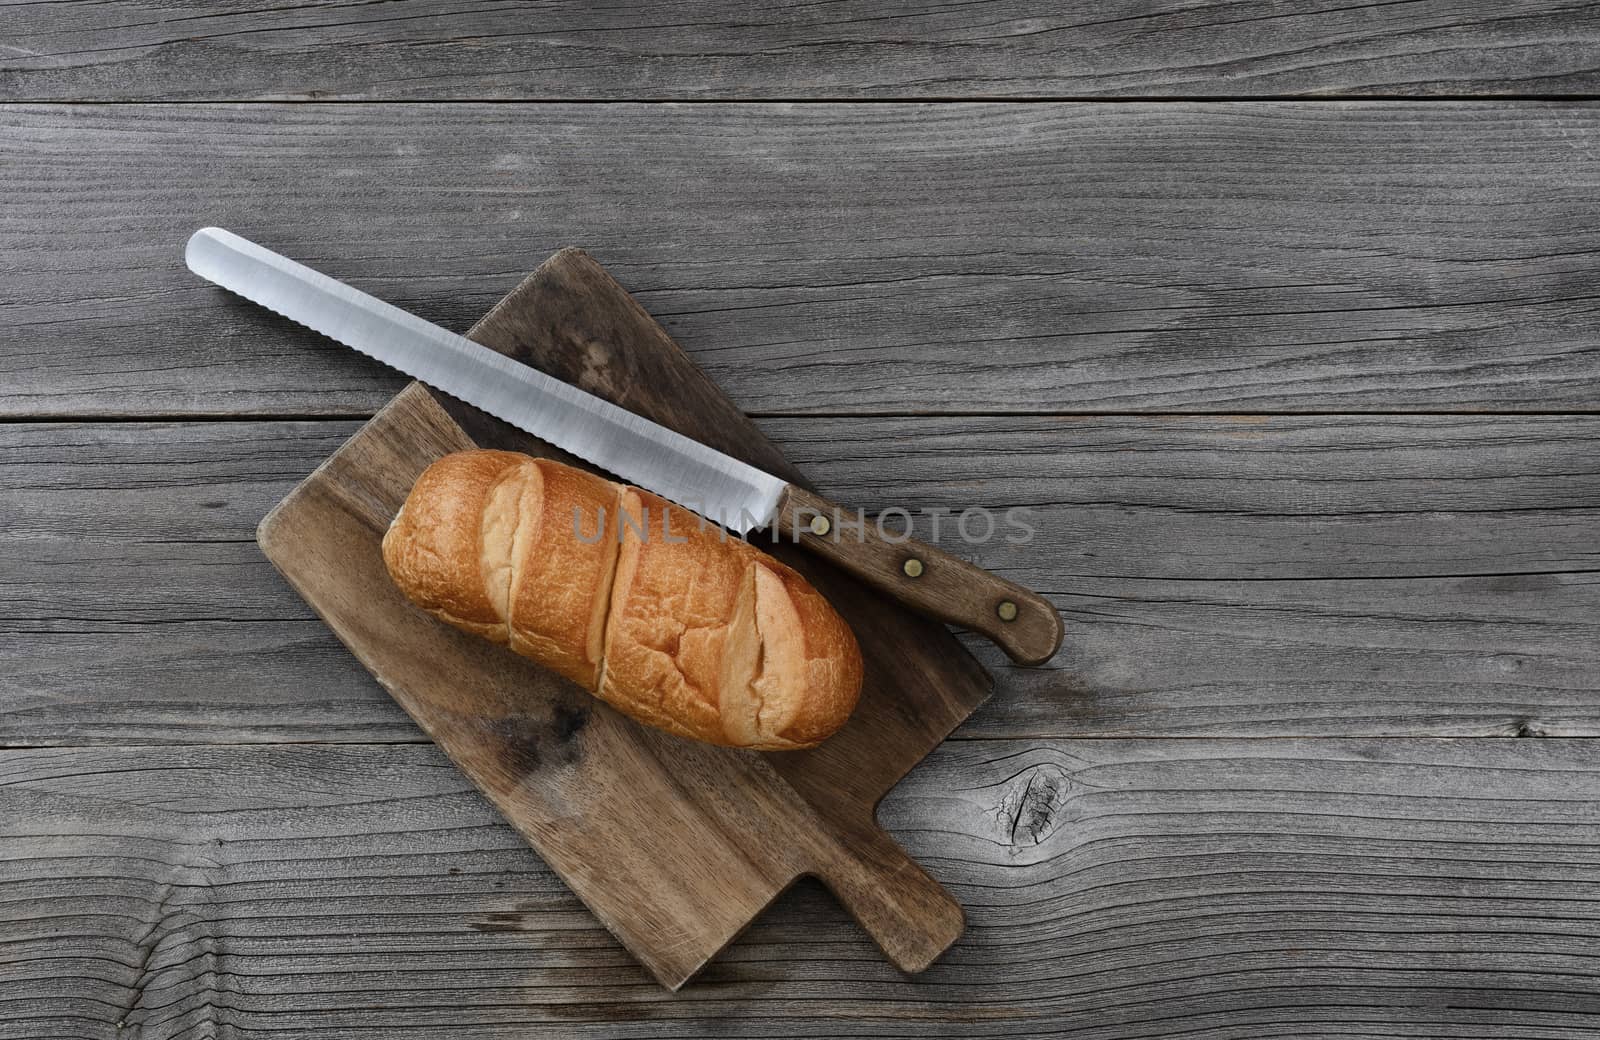 Organic whole wheat loaf with curated knife on cutting board in  by tab1962